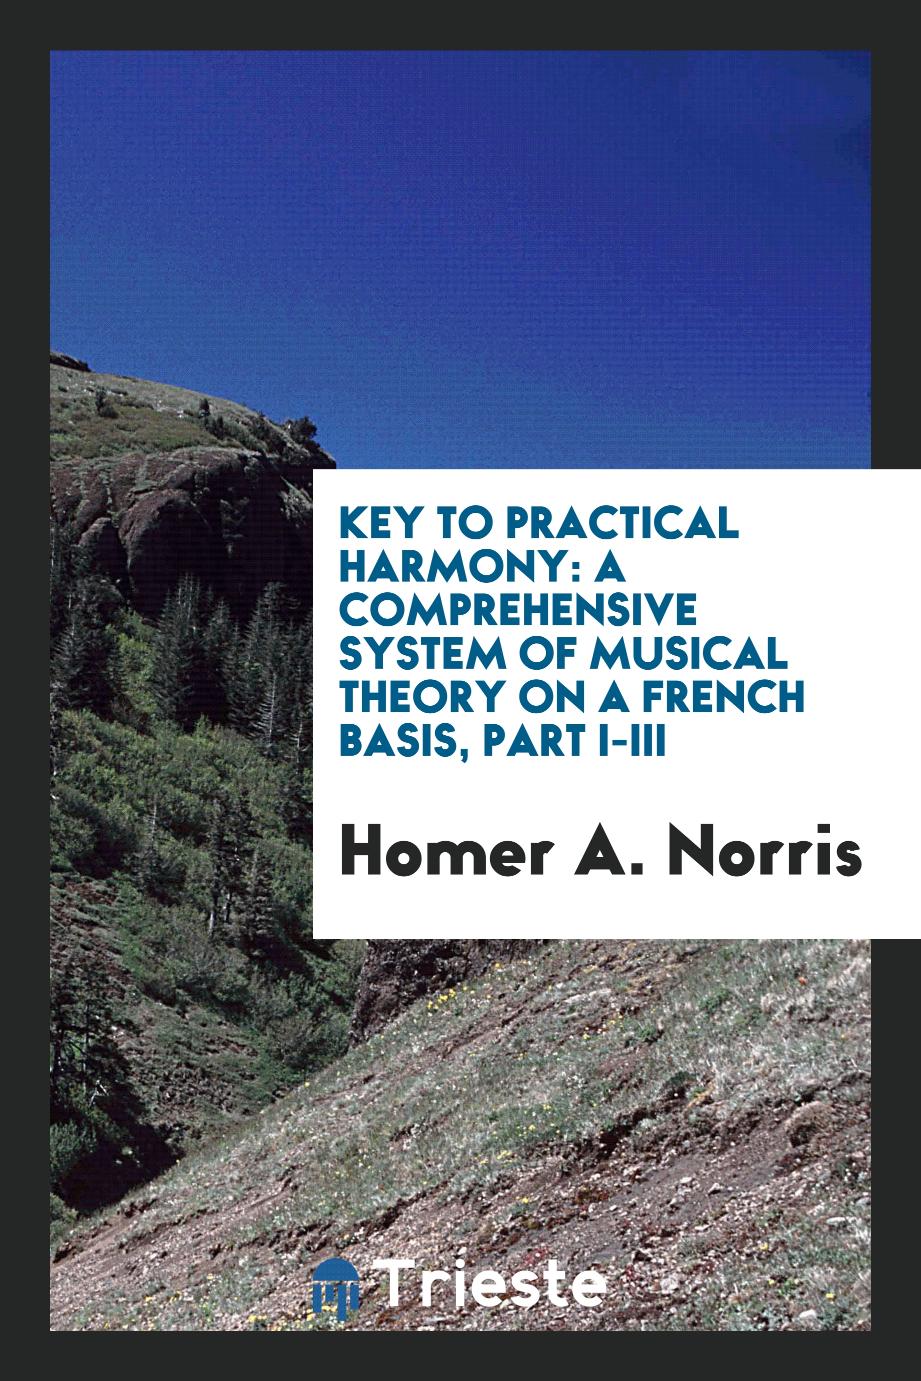 Key to Practical Harmony: A Comprehensive System of Musical Theory on a French Basis, Part I-III